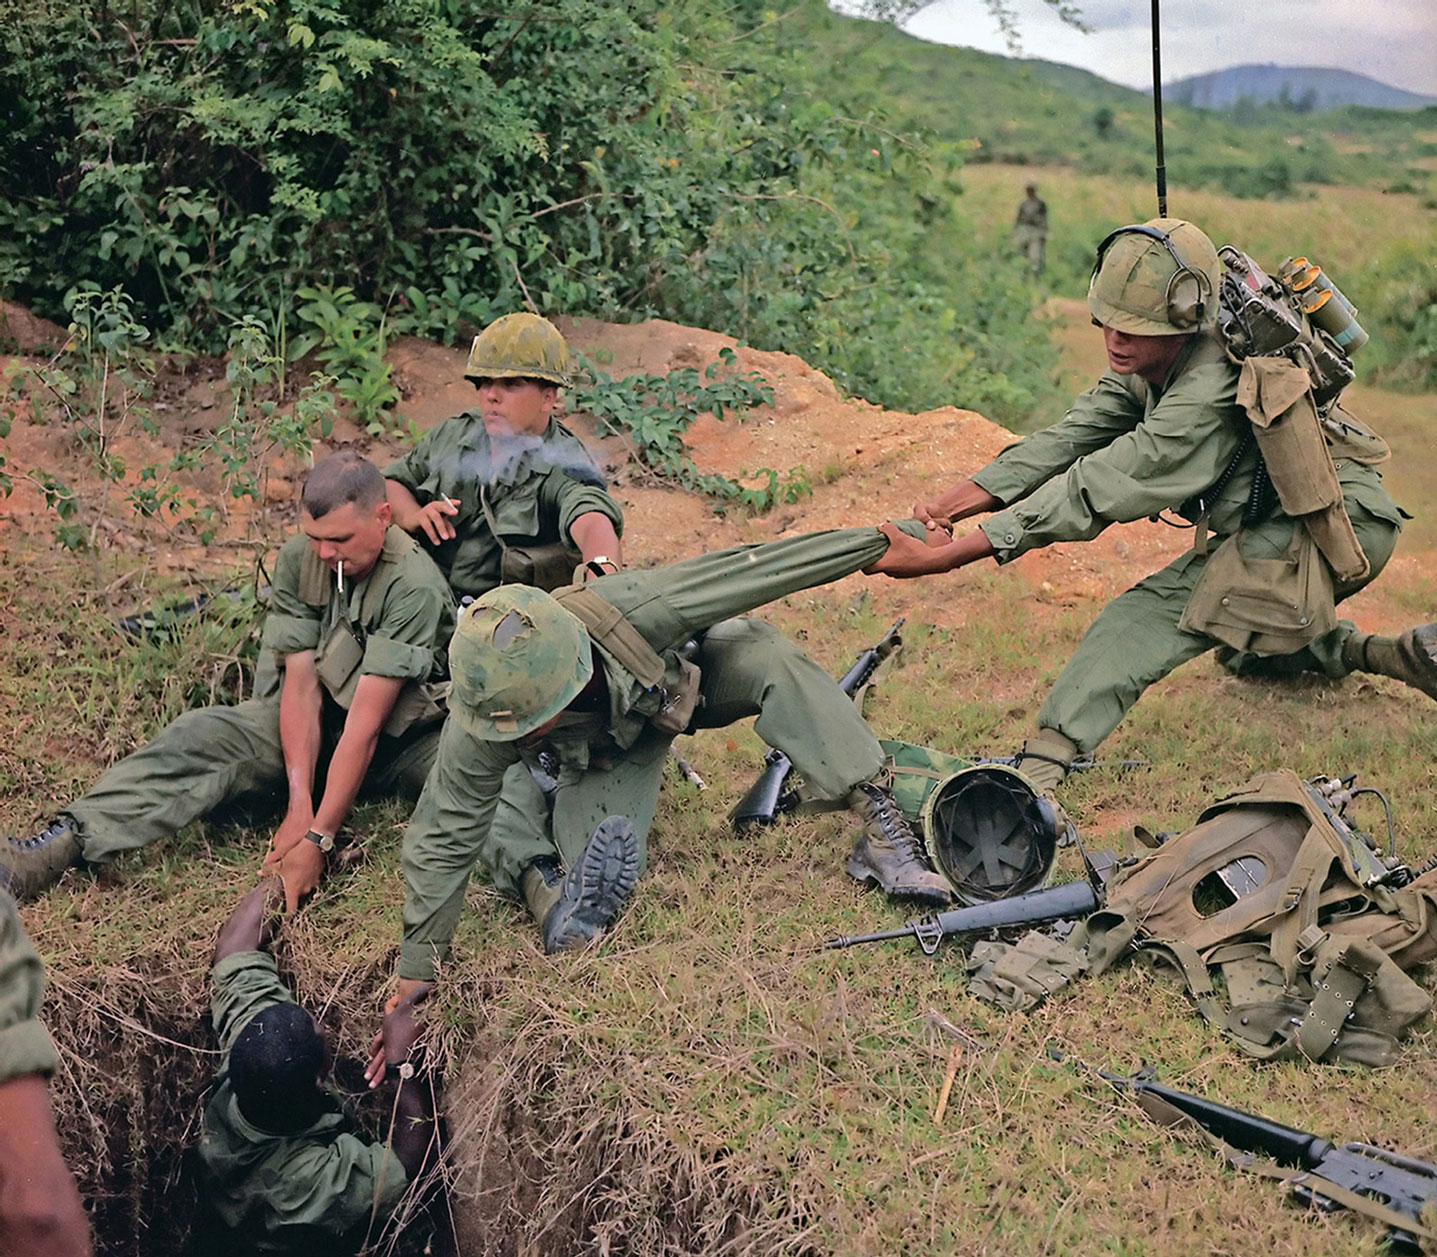 “Tunnel rats” at work during Operation Oregon, 24 April 1967.
Courtesy National Archives and Records Administration.